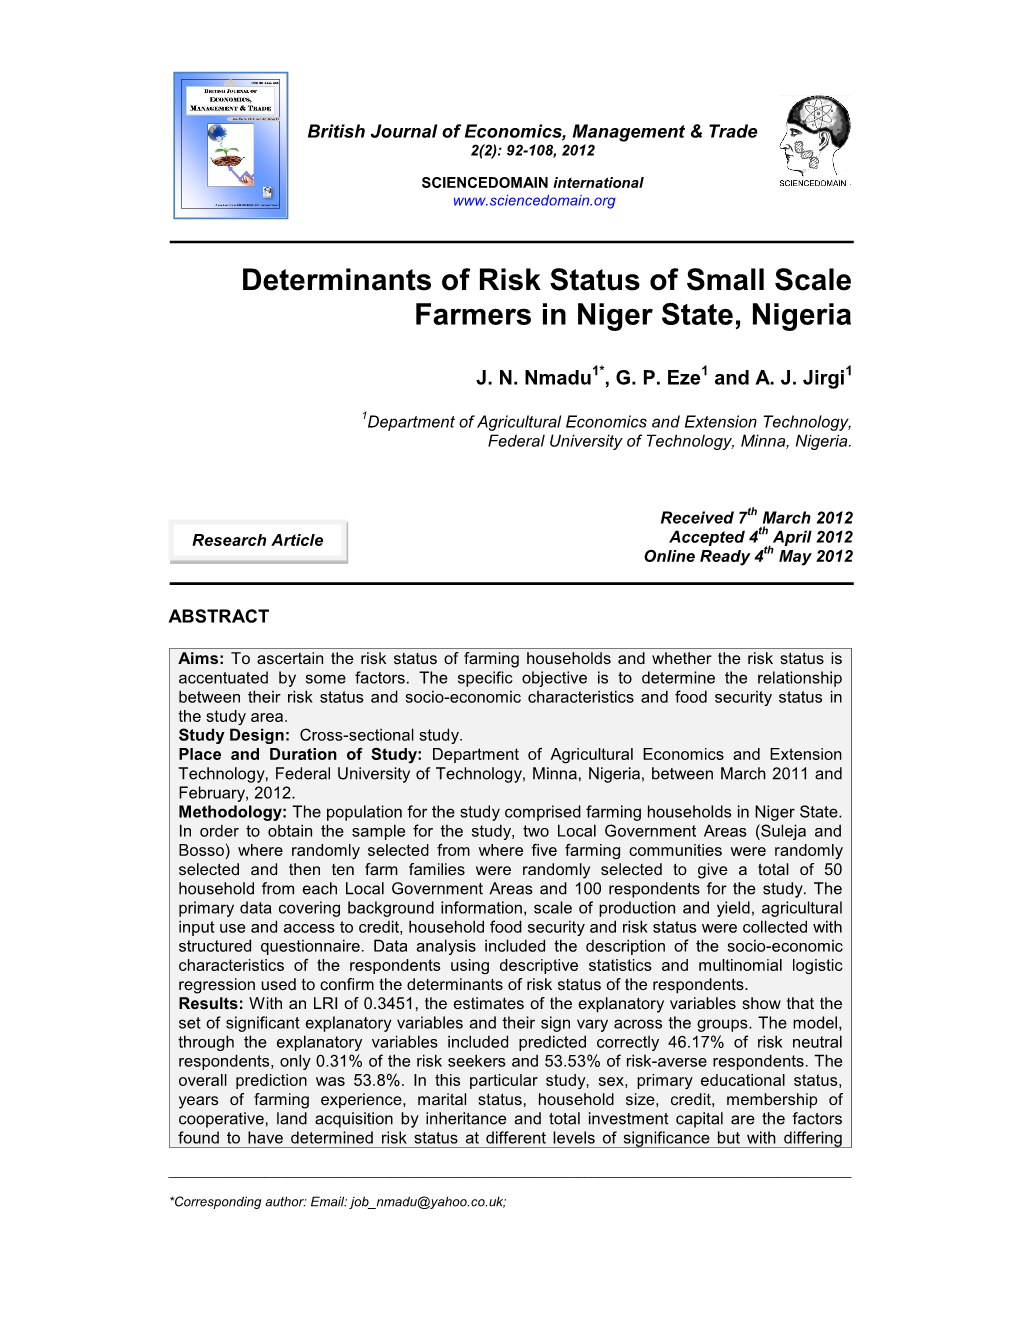 Determinants of Risk Status of Small Scale Farmers in Niger State, Nigeria